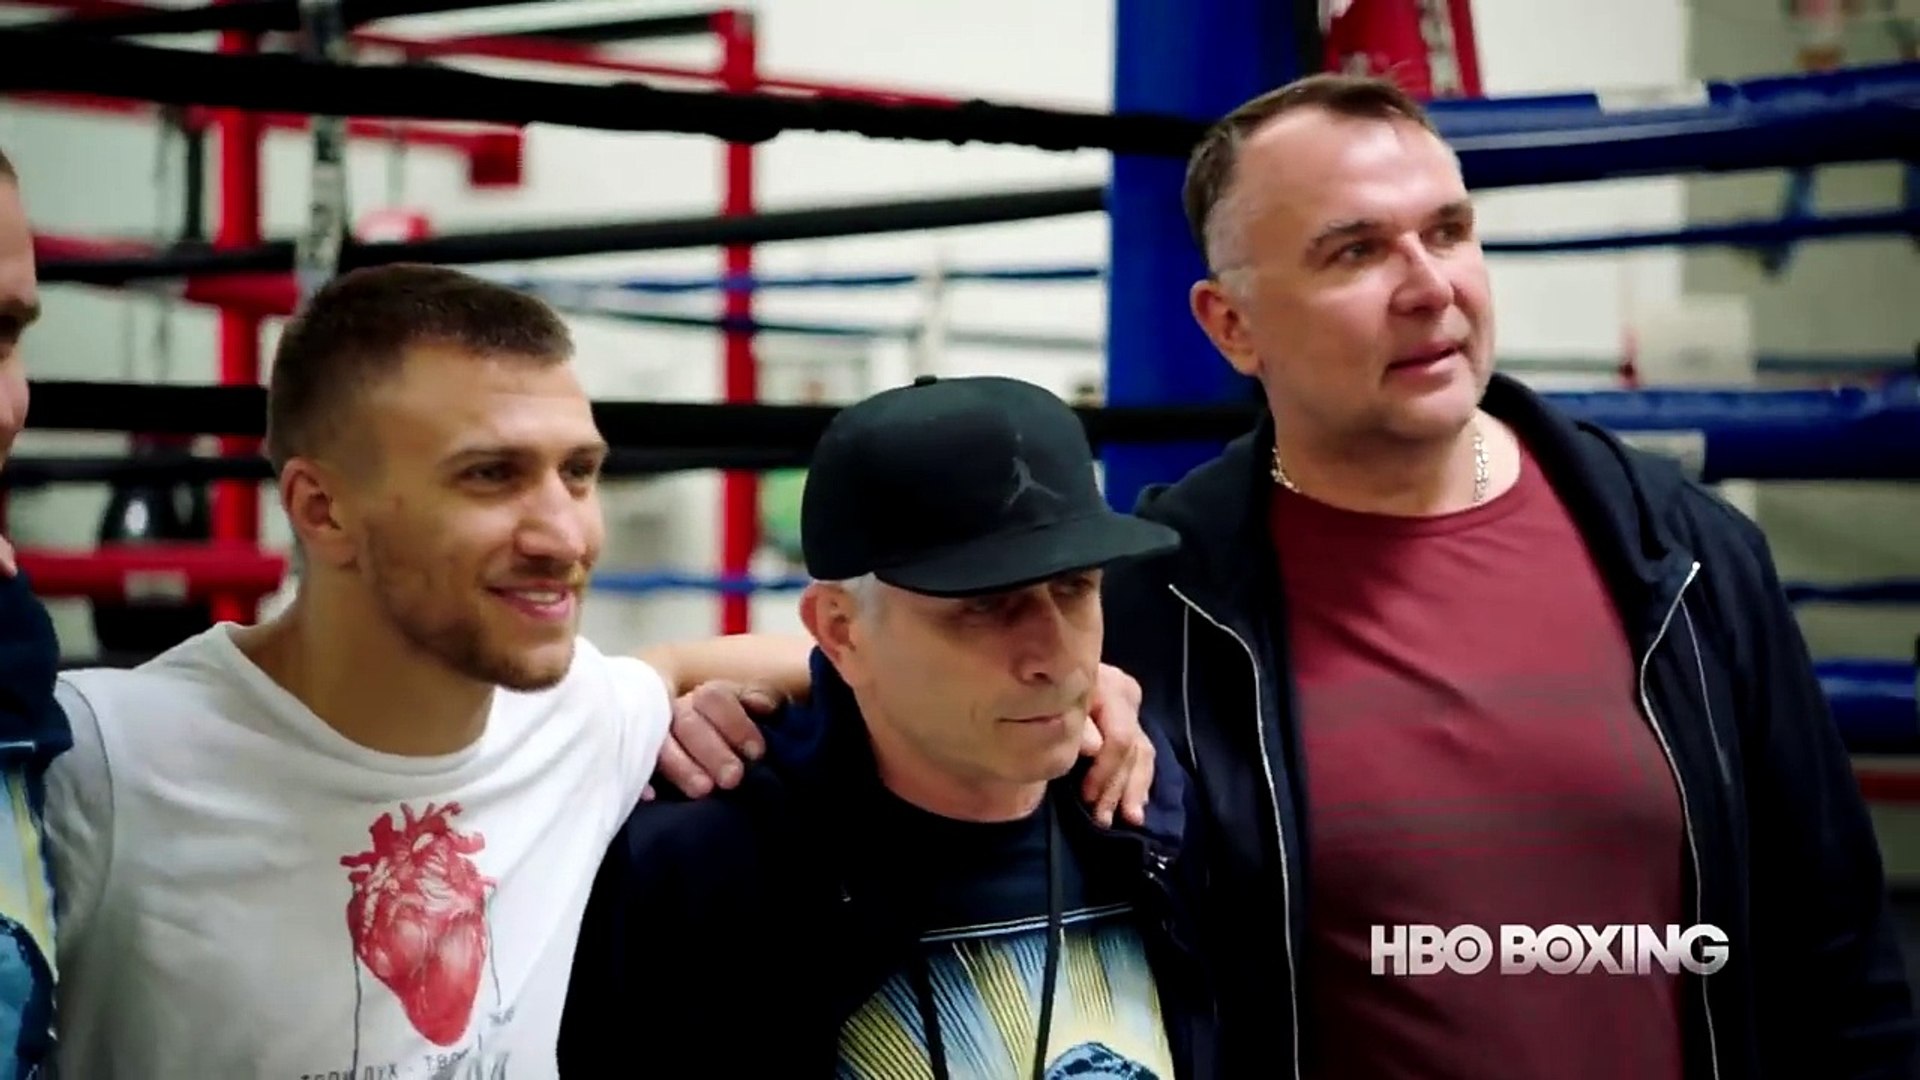 HBO Boxing News: Ukraine Trio Interview (HBO Boxing)